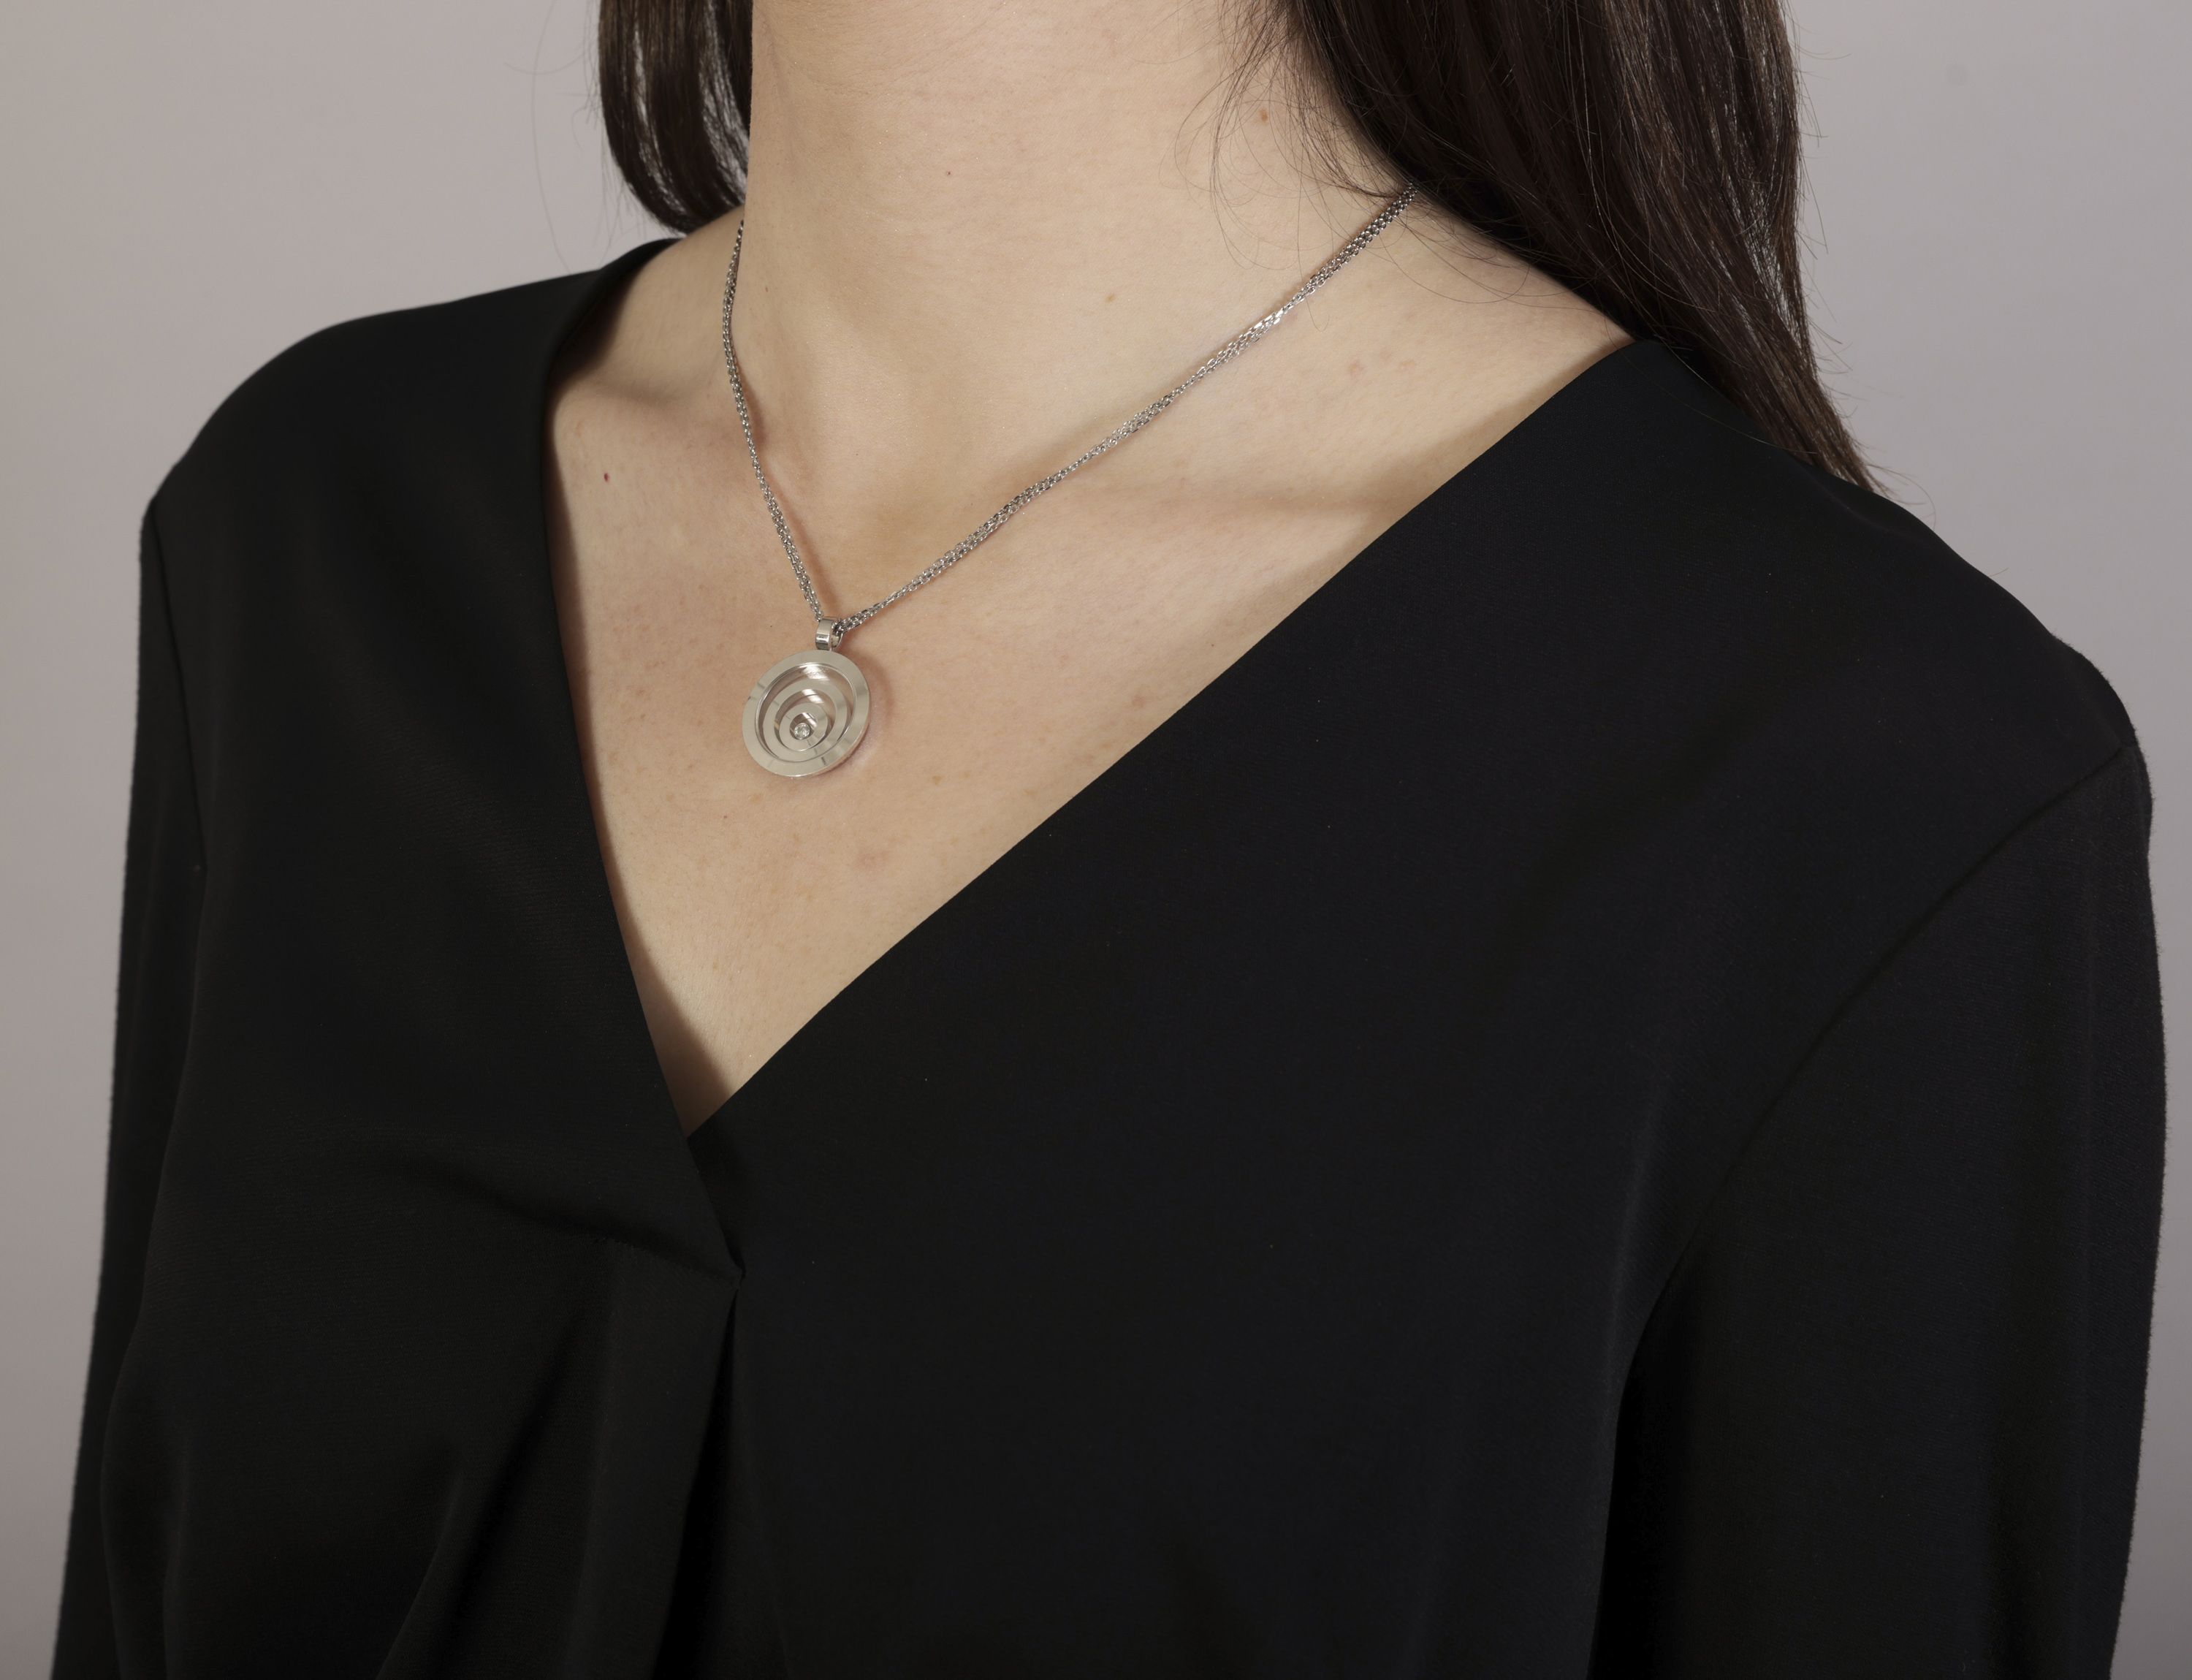 A DIAMOND 'HAPPY SPIRIT' PENDANT ON CHAIN, BY CHOPARD The circular glazed pendant enclosing two - Image 3 of 3